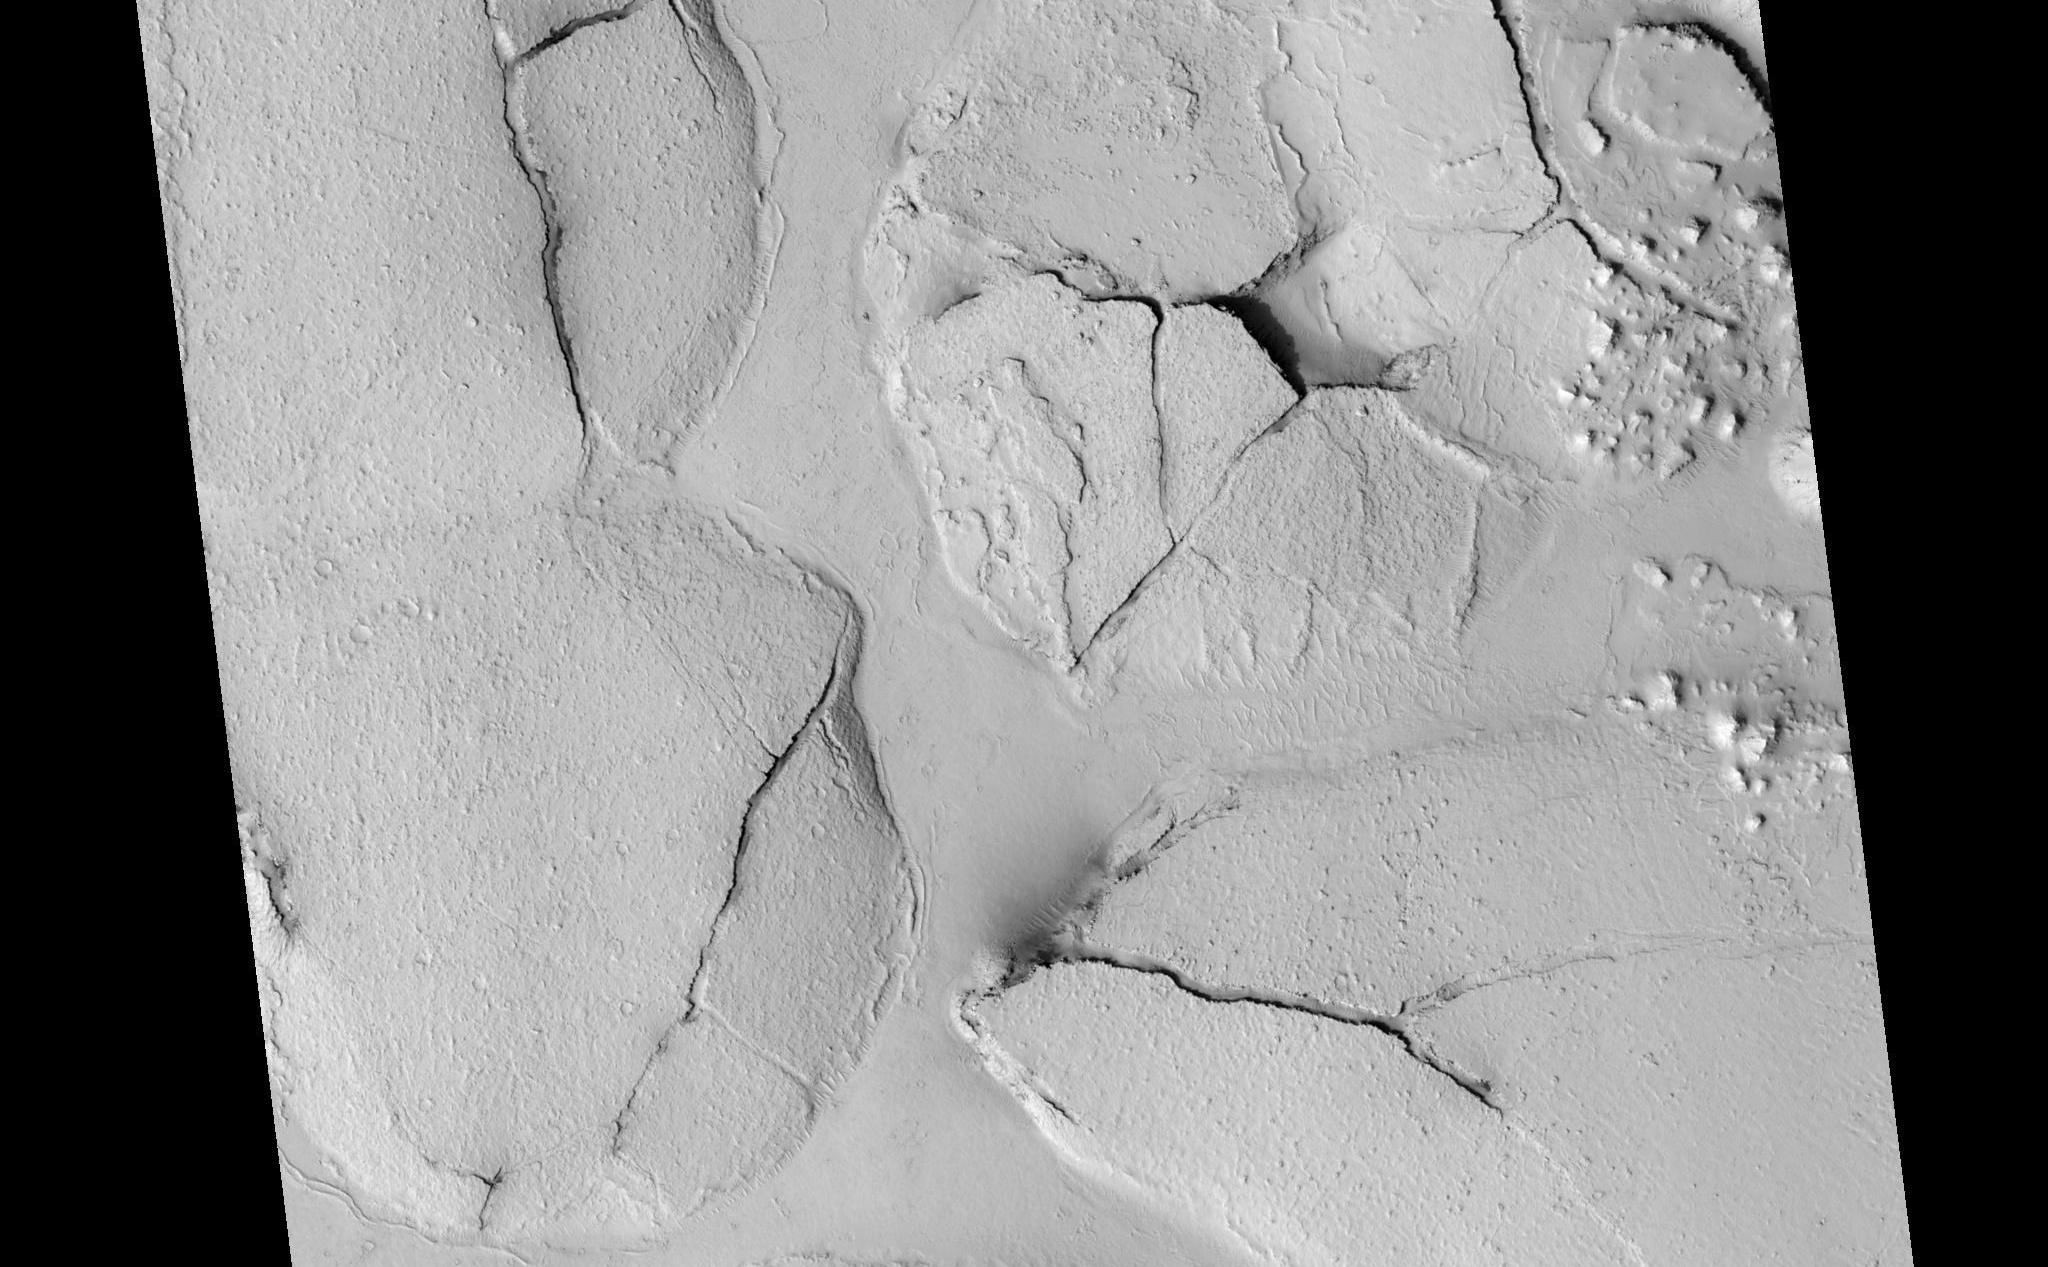 This HiRISE image (PSP_003597_1765), shows fractured mounds on the southern edge of Elysium Planitia.The mounds are typically a few kilometers in diameter and about 200 feet tall. The fractures that crisscross their surfaces are dilational (extensional) in nature, suggesting that the mounds formed by localized uplift (i.e., they were pushed up from below).The mounds are probably composed of solidified lava. They are contiguous with, and texturally similar to, the flood lavas that blanket much of Elysium Planitia, and, where dilation cracks provide cross-sectional exposure, the uplifted material is rocky.Patches of mechanically weak and disrupted material overlie the rocky mound material. This is particularly conspicuous in the northeast corner of the HiRISE image. These patches may be remnants of a layer that was once more continuous but has been extensively eroded. Smooth lava plains fill the low-lying areas between the mounds. They are riddled with sinuous pressure ridges. The entire area is covered by a relatively thin layer of dust and sand.